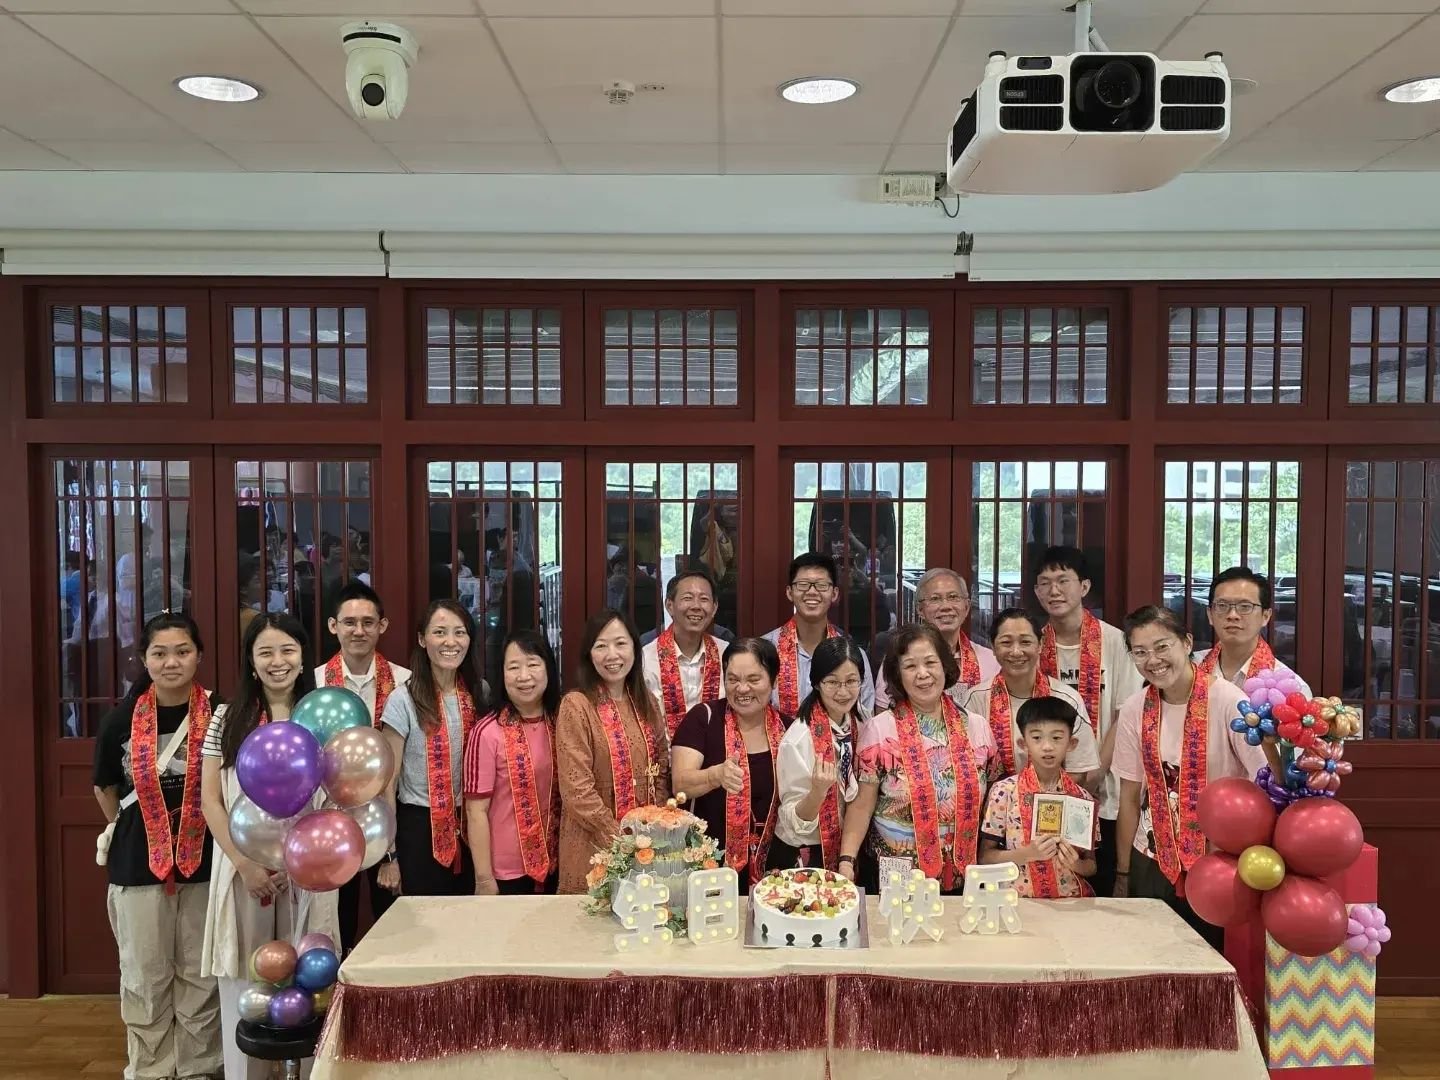 Our birthday celebrants invited friends and families for a heartwarming lunch gathering yesterday, garnering up to 150 guests! While we celebrate for the month of April, let's take a moment to thank all volunteers for their contributions in making th